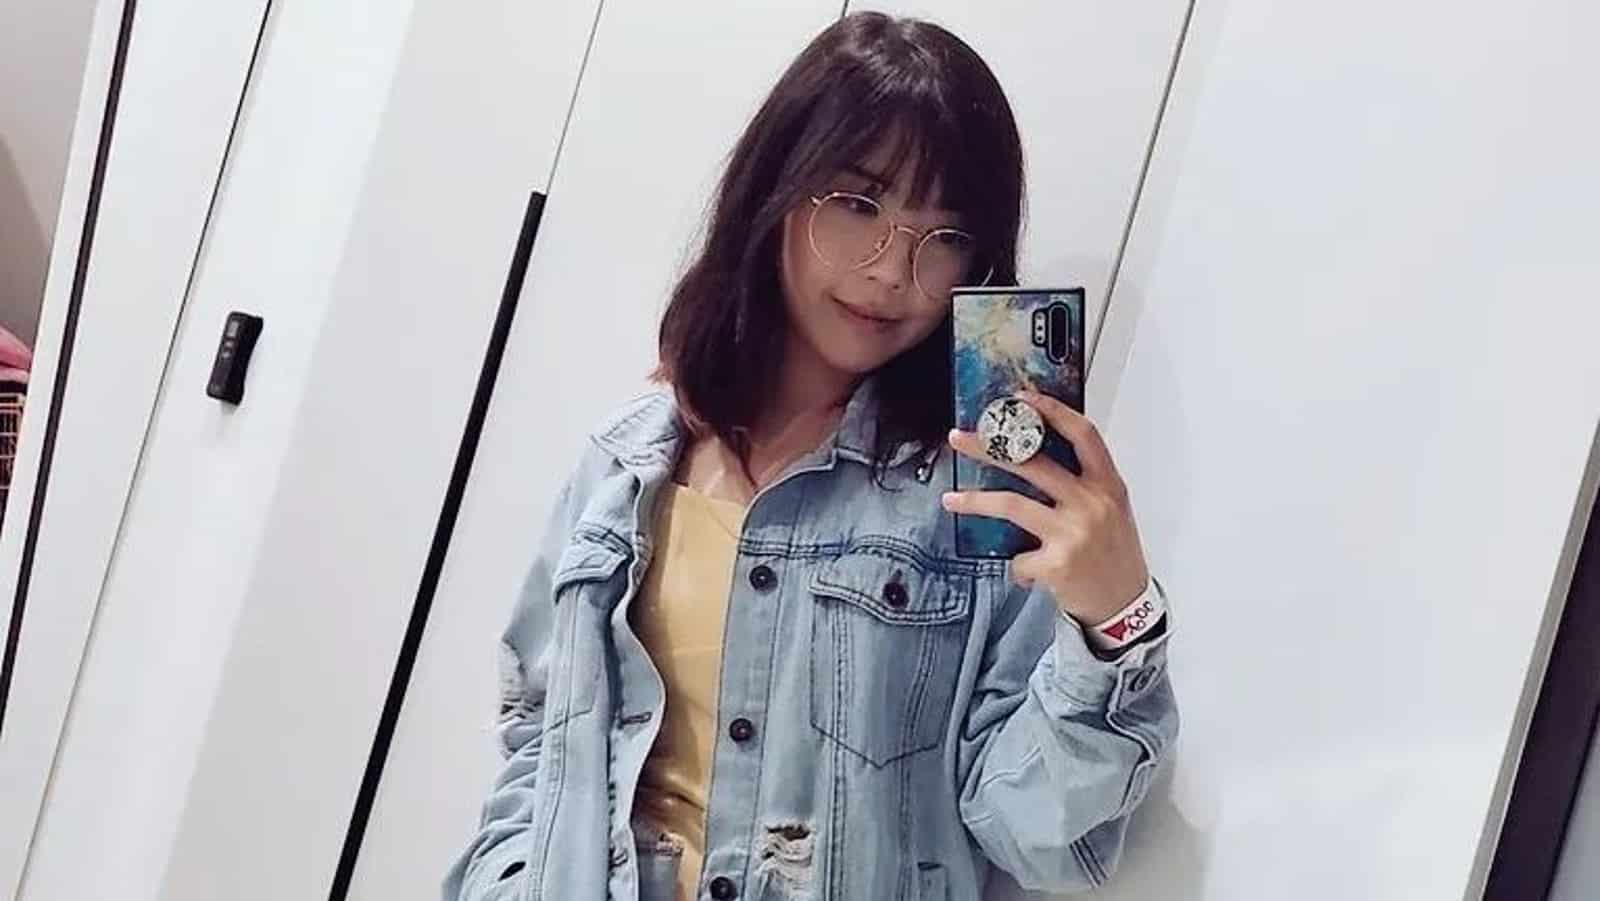 Twitch streamer Lilypichu taking a mirror selfie in a denim jacket and yellow dress